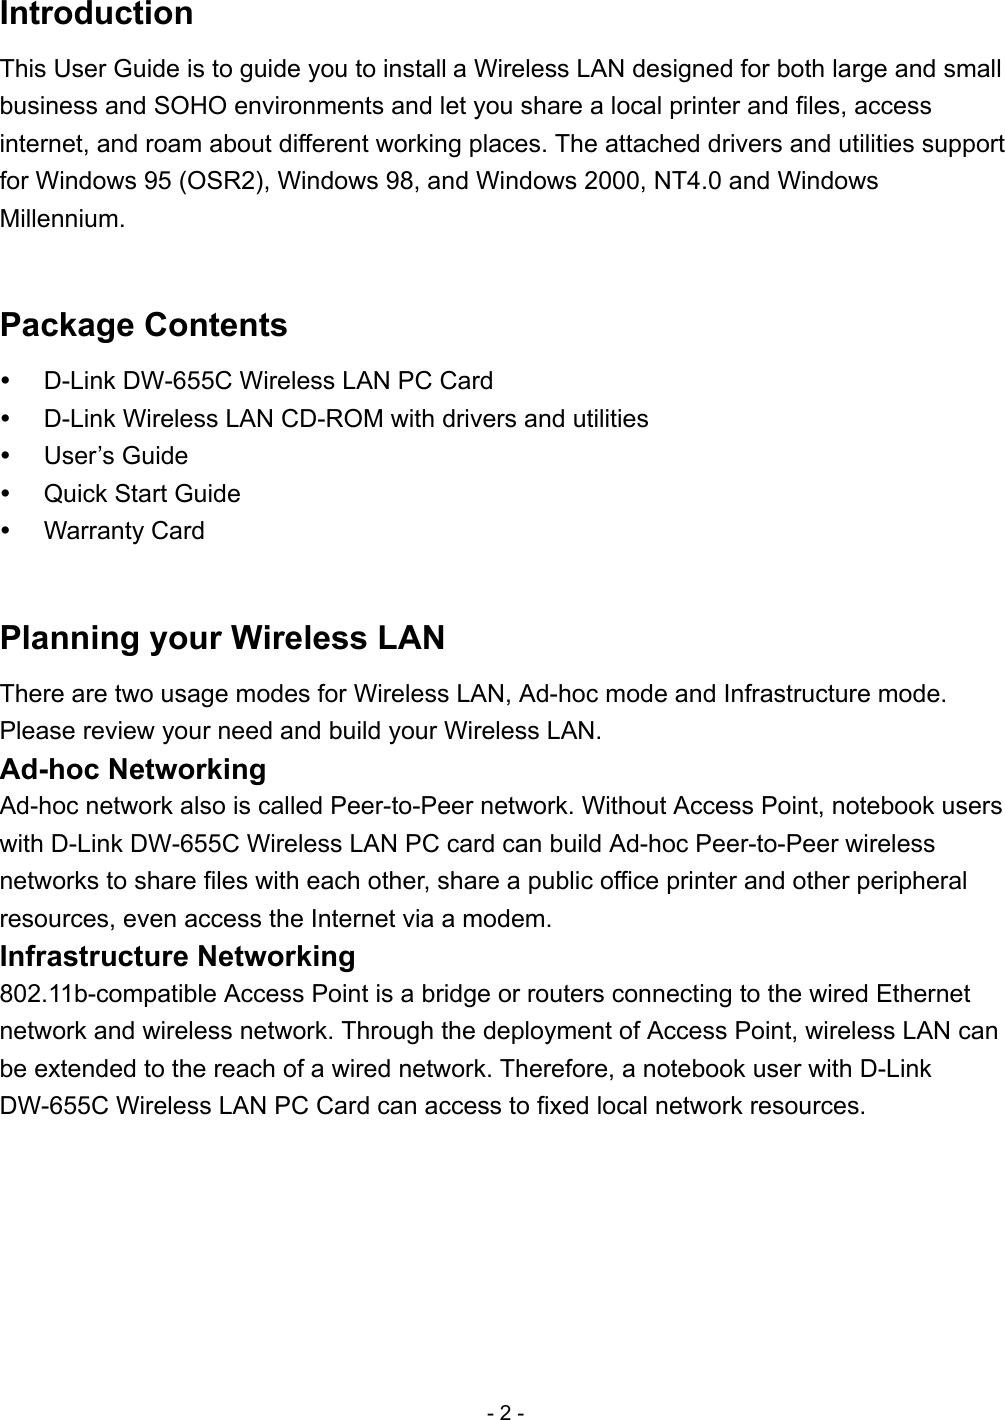 Introduction This User Guide is to guide you to install a Wireless LAN designed for both large and small business and SOHO environments and let you share a local printer and files, access internet, and roam about different working places. The attached drivers and utilities support for Windows 95 (OSR2), Windows 98, and Windows 2000, NT4.0 and Windows Millennium.  Package Contents   D-Link DW-655C Wireless LAN PC Card   D-Link Wireless LAN CD-ROM with drivers and utilities   User’s Guide   Quick Start Guide   Warranty Card  Planning your Wireless LAN There are two usage modes for Wireless LAN, Ad-hoc mode and Infrastructure mode. Please review your need and build your Wireless LAN. Ad-hoc Networking Ad-hoc network also is called Peer-to-Peer network. Without Access Point, notebook users with D-Link DW-655C Wireless LAN PC card can build Ad-hoc Peer-to-Peer wireless networks to share files with each other, share a public office printer and other peripheral resources, even access the Internet via a modem. Infrastructure Networking 802.11b-compatible Access Point is a bridge or routers connecting to the wired Ethernet network and wireless network. Through the deployment of Access Point, wireless LAN can be extended to the reach of a wired network. Therefore, a notebook user with D-Link DW-655C Wireless LAN PC Card can access to fixed local network resources. - 2 - 